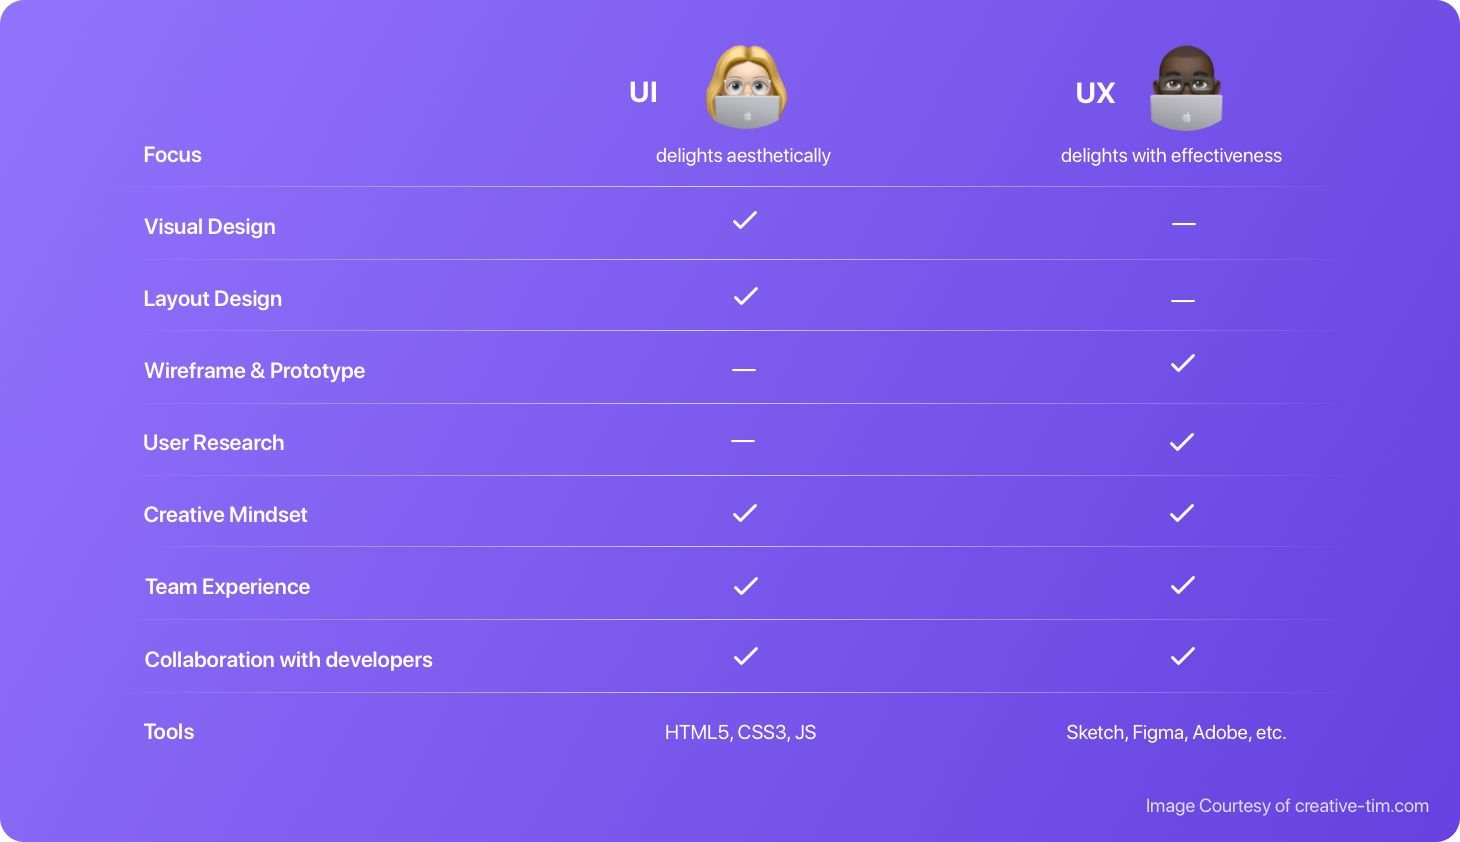 A table showing the differences between UI and UX designers.